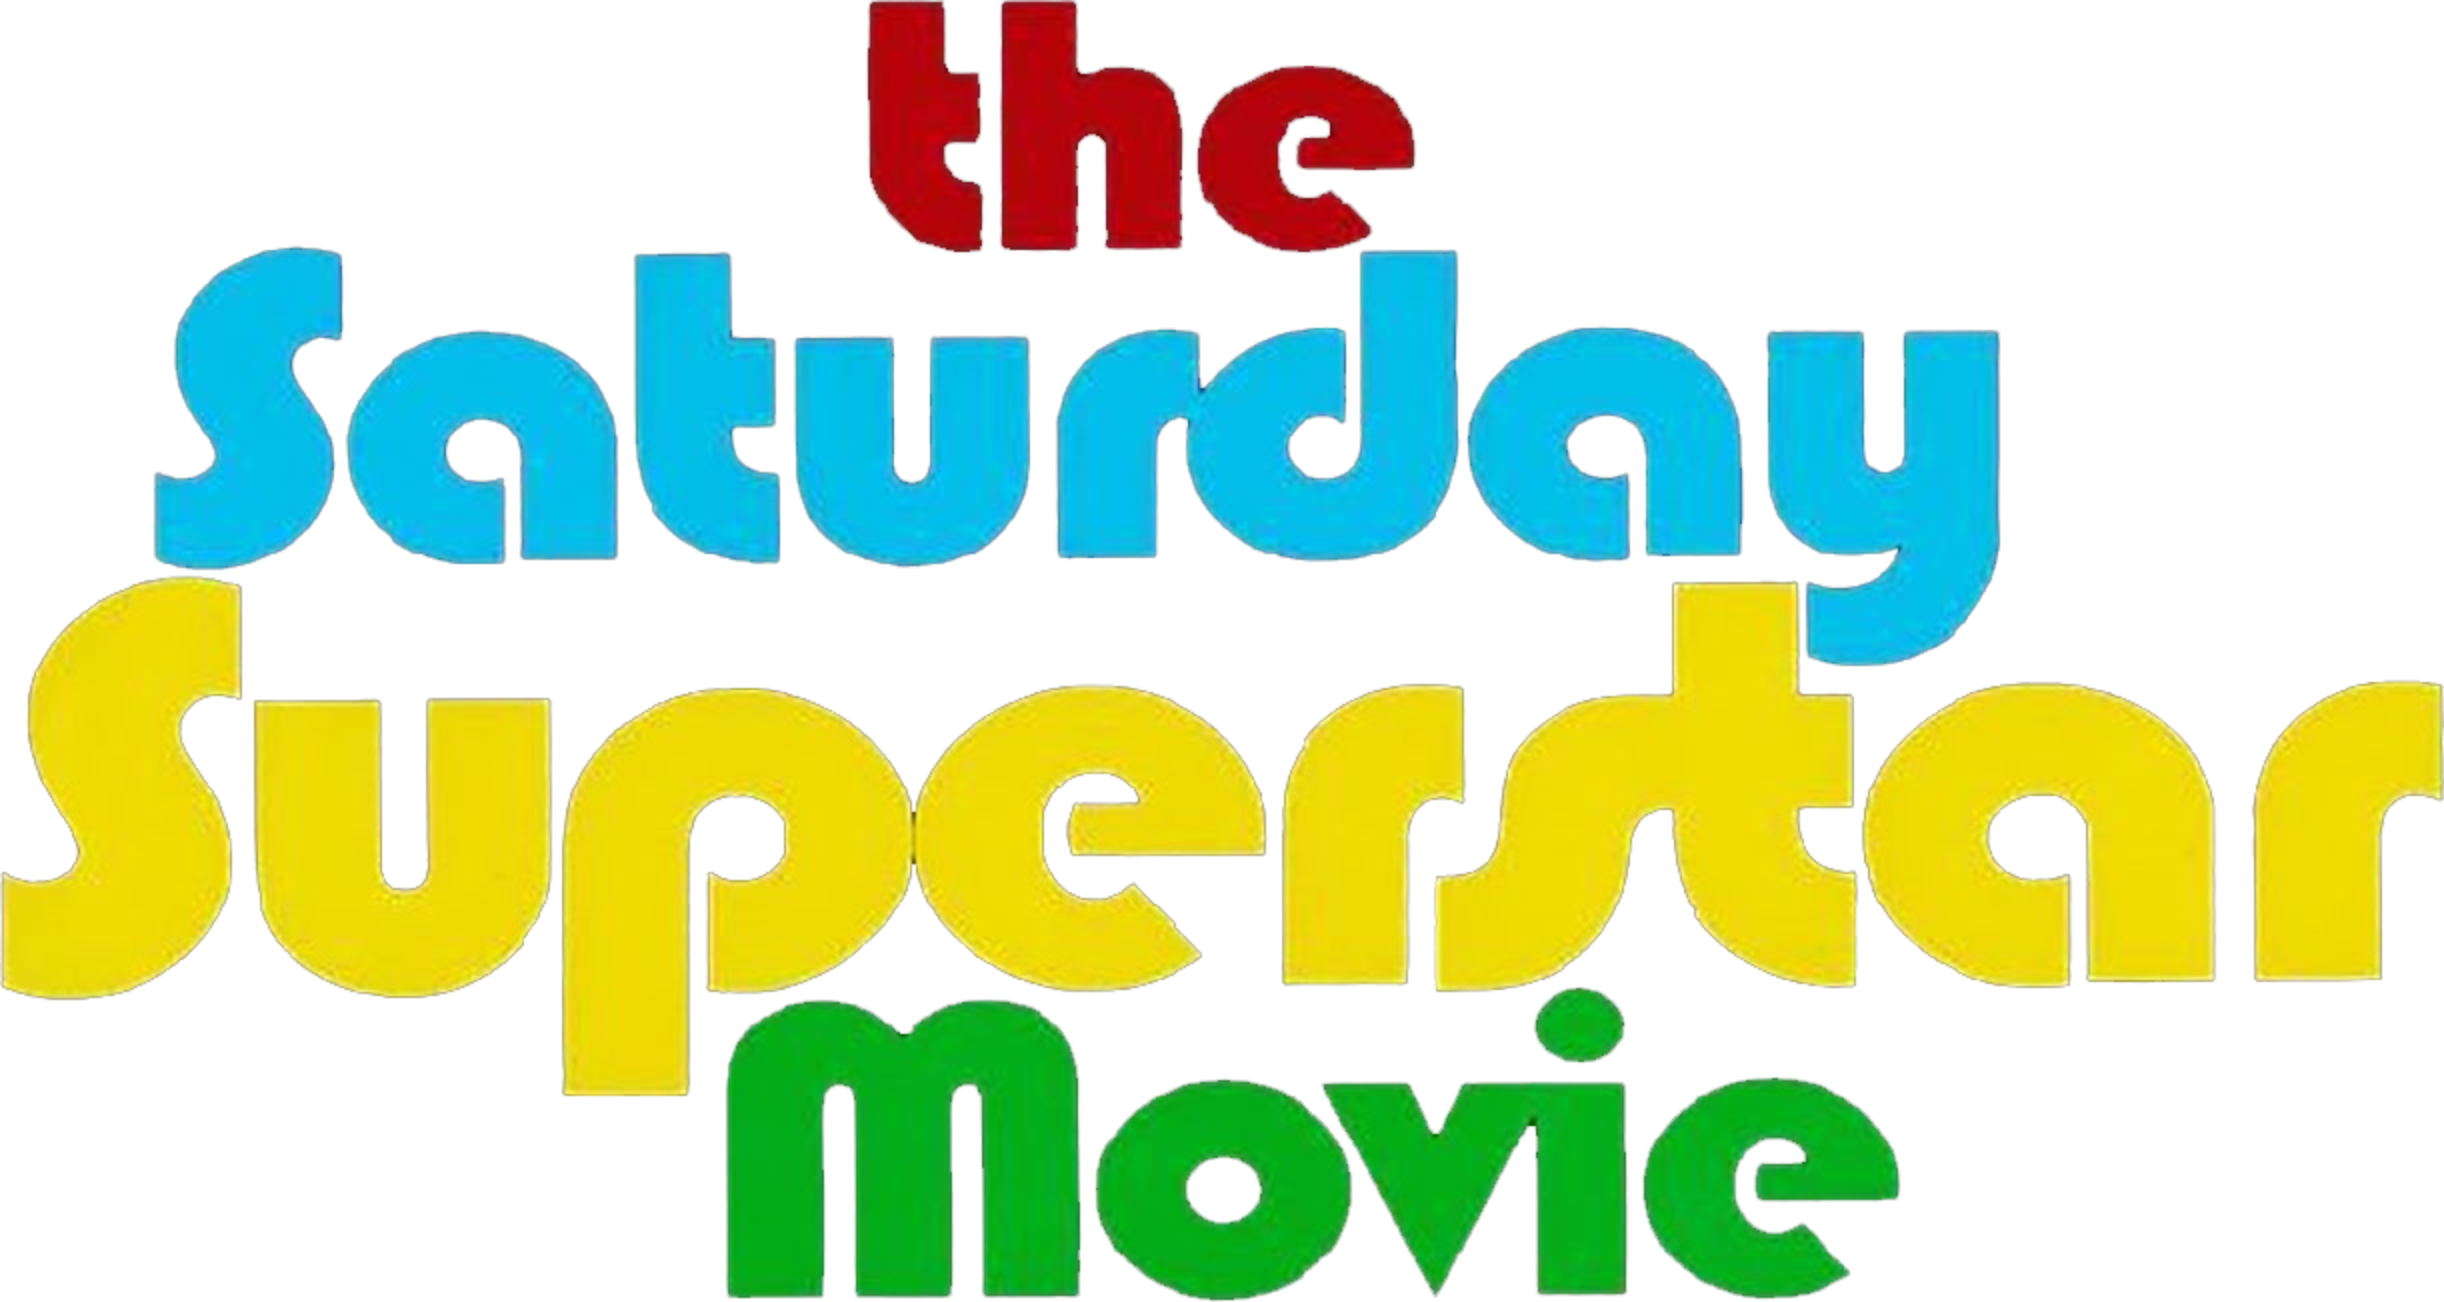 The ABC Saturday Superstar Movie Complete 